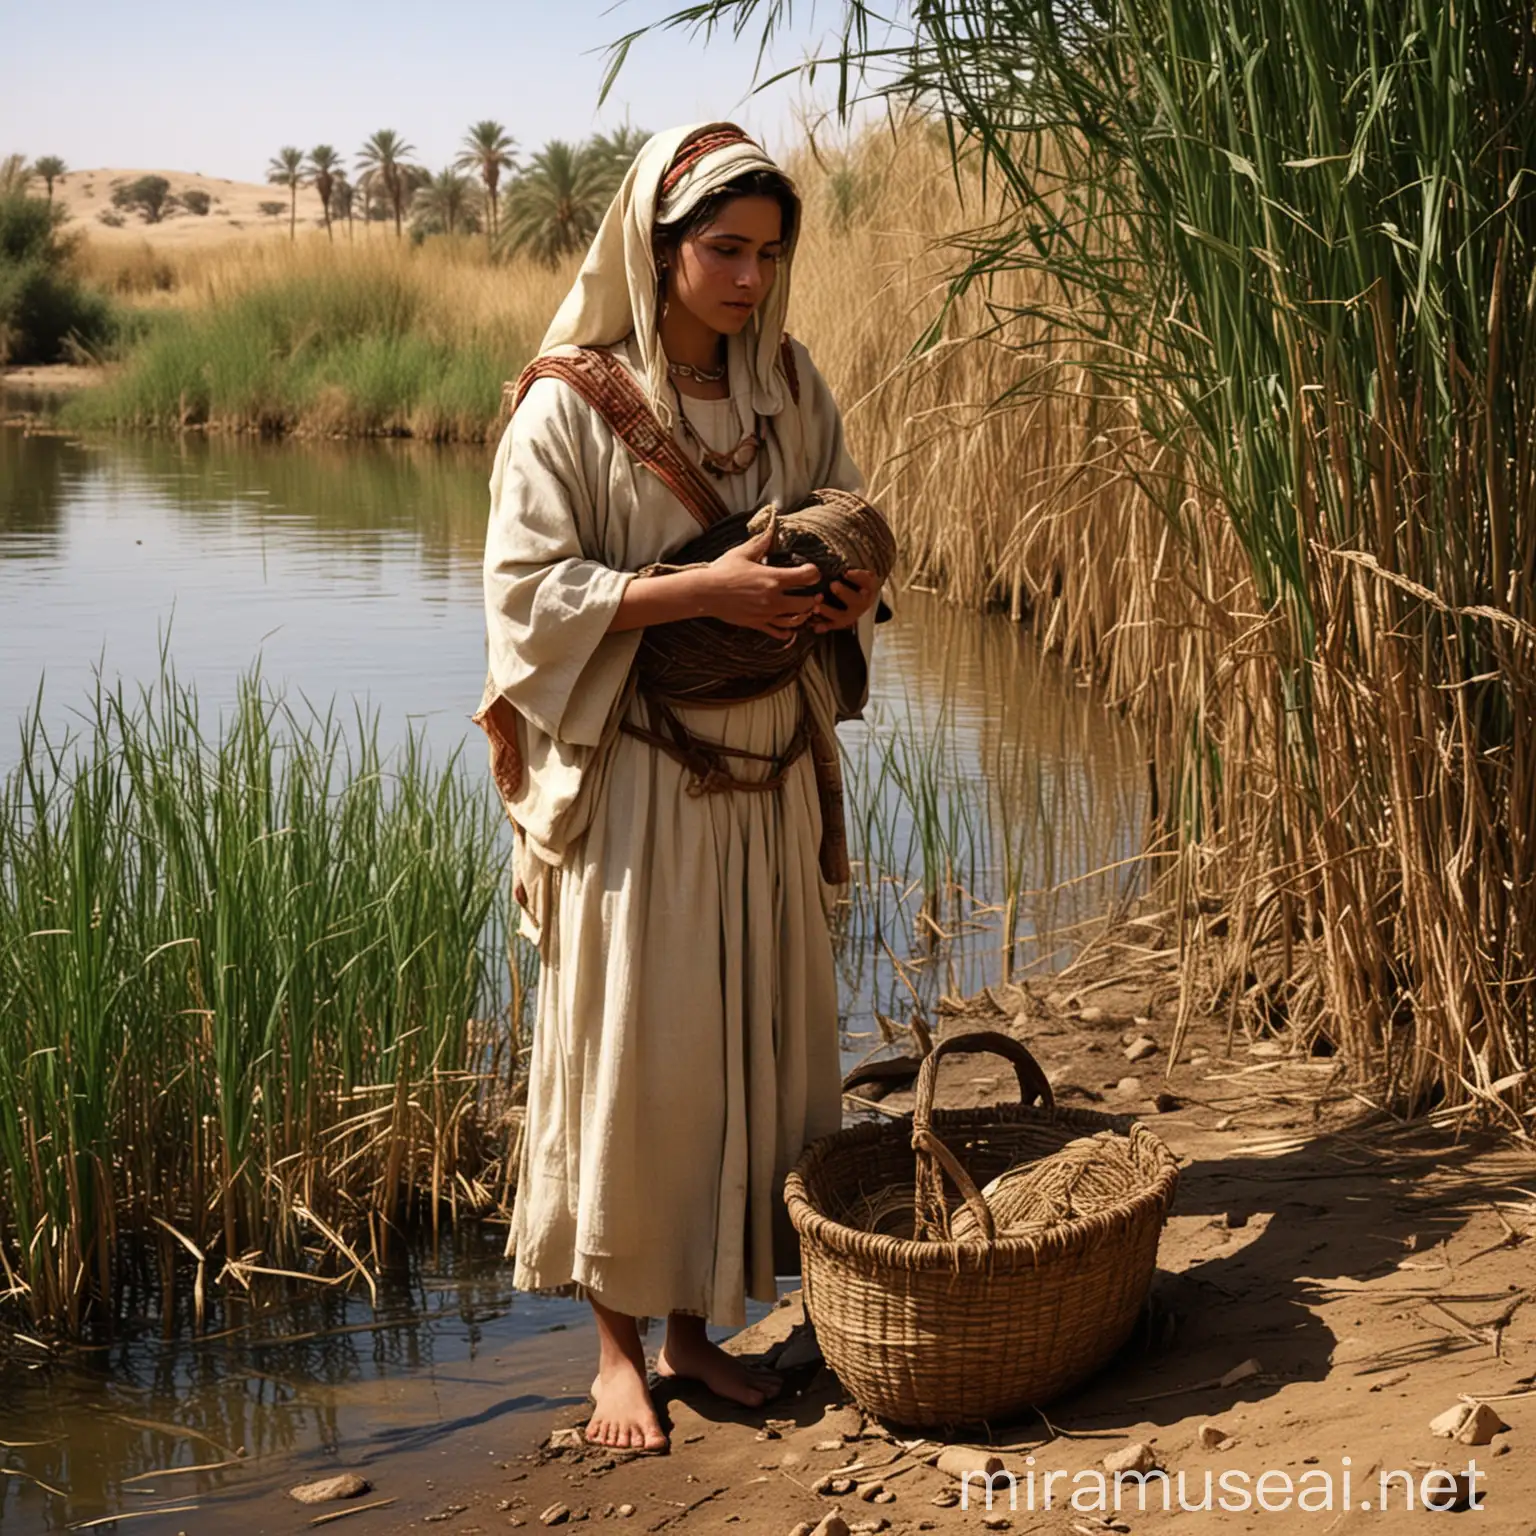 Mothers Courage Hiding Her Son in the Nile Reeds